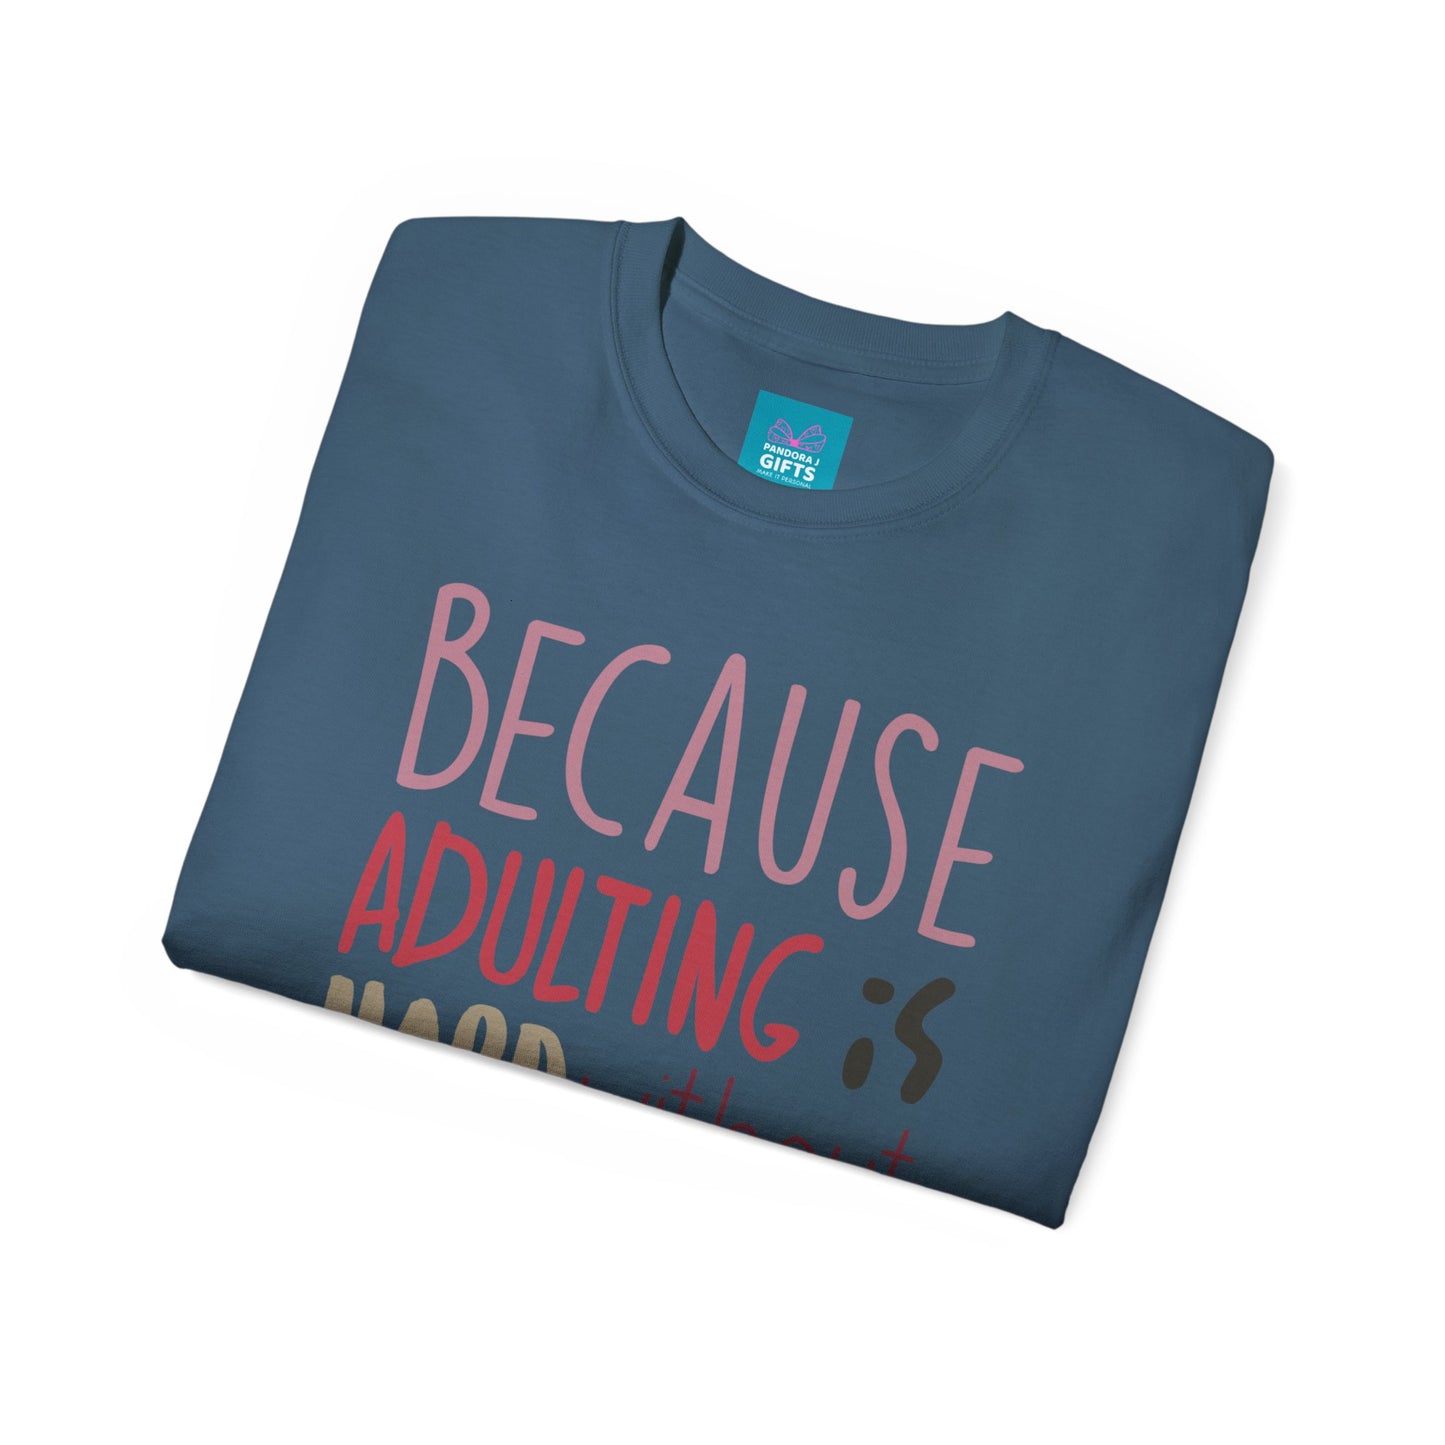 teal blue shirt with words "Because Adulting is Hard without Jesus"